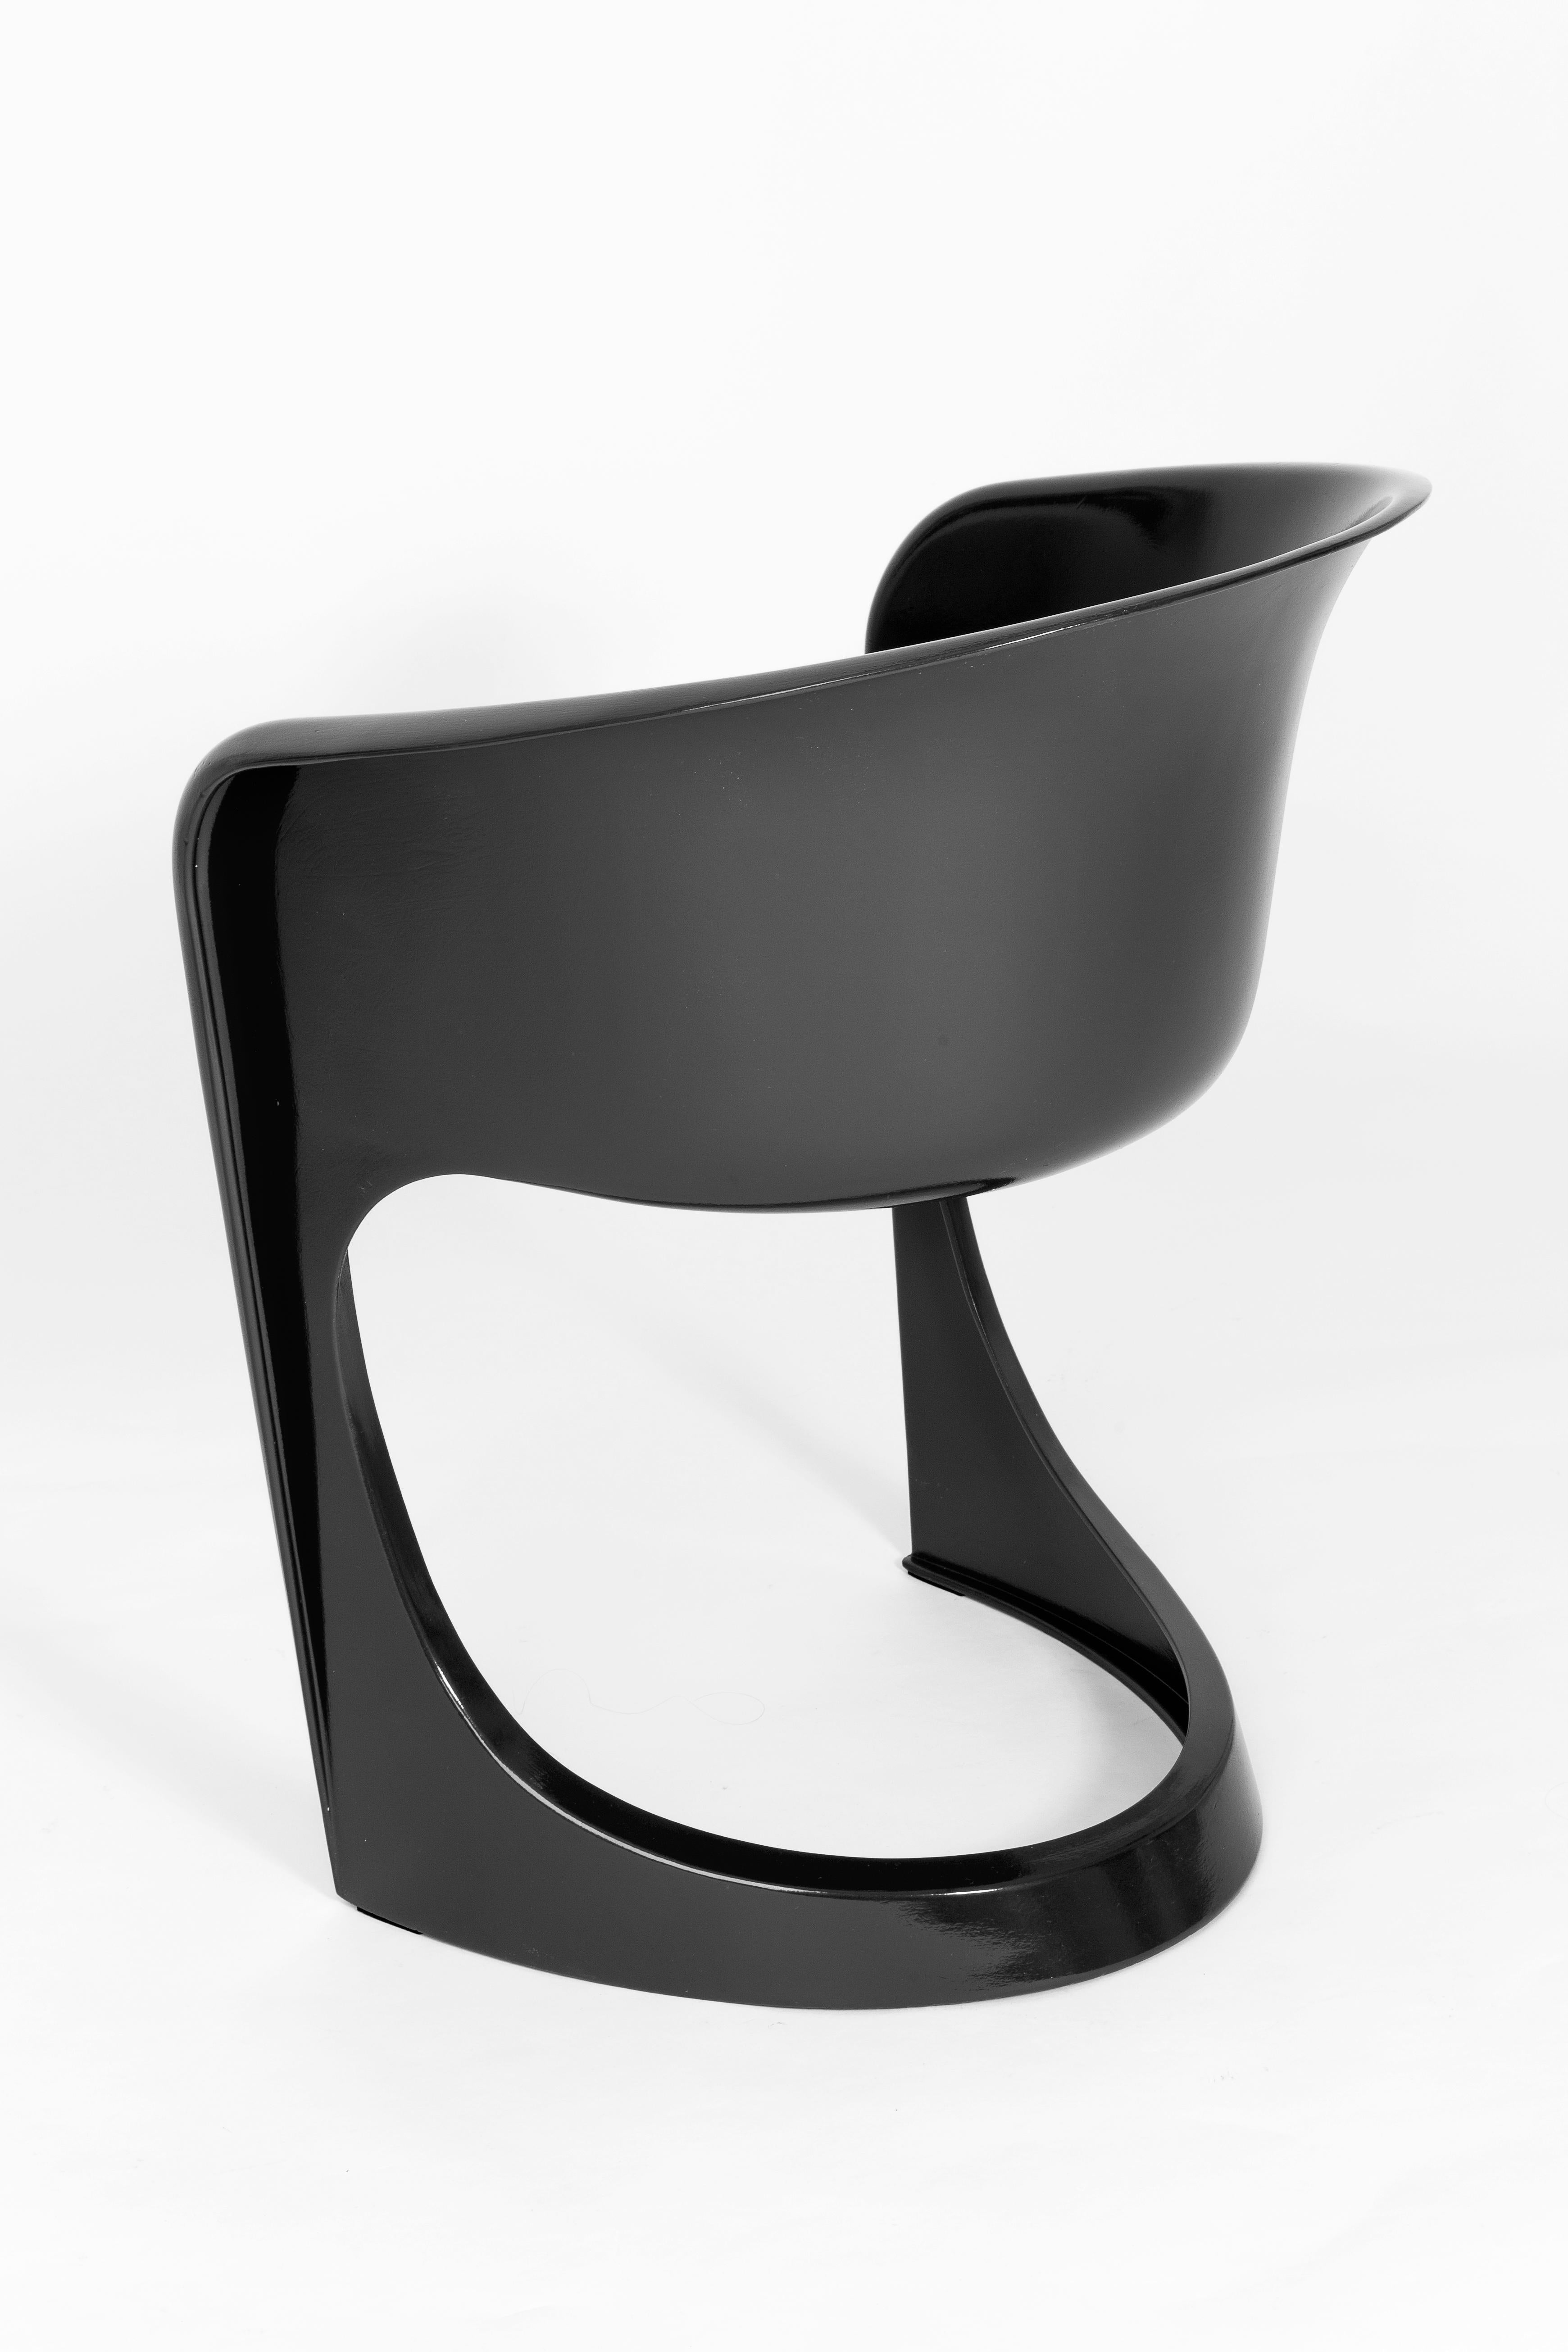 Plastic Set of Four Black Glossy Cado Chairs, Steen Østergaard, 1974 For Sale